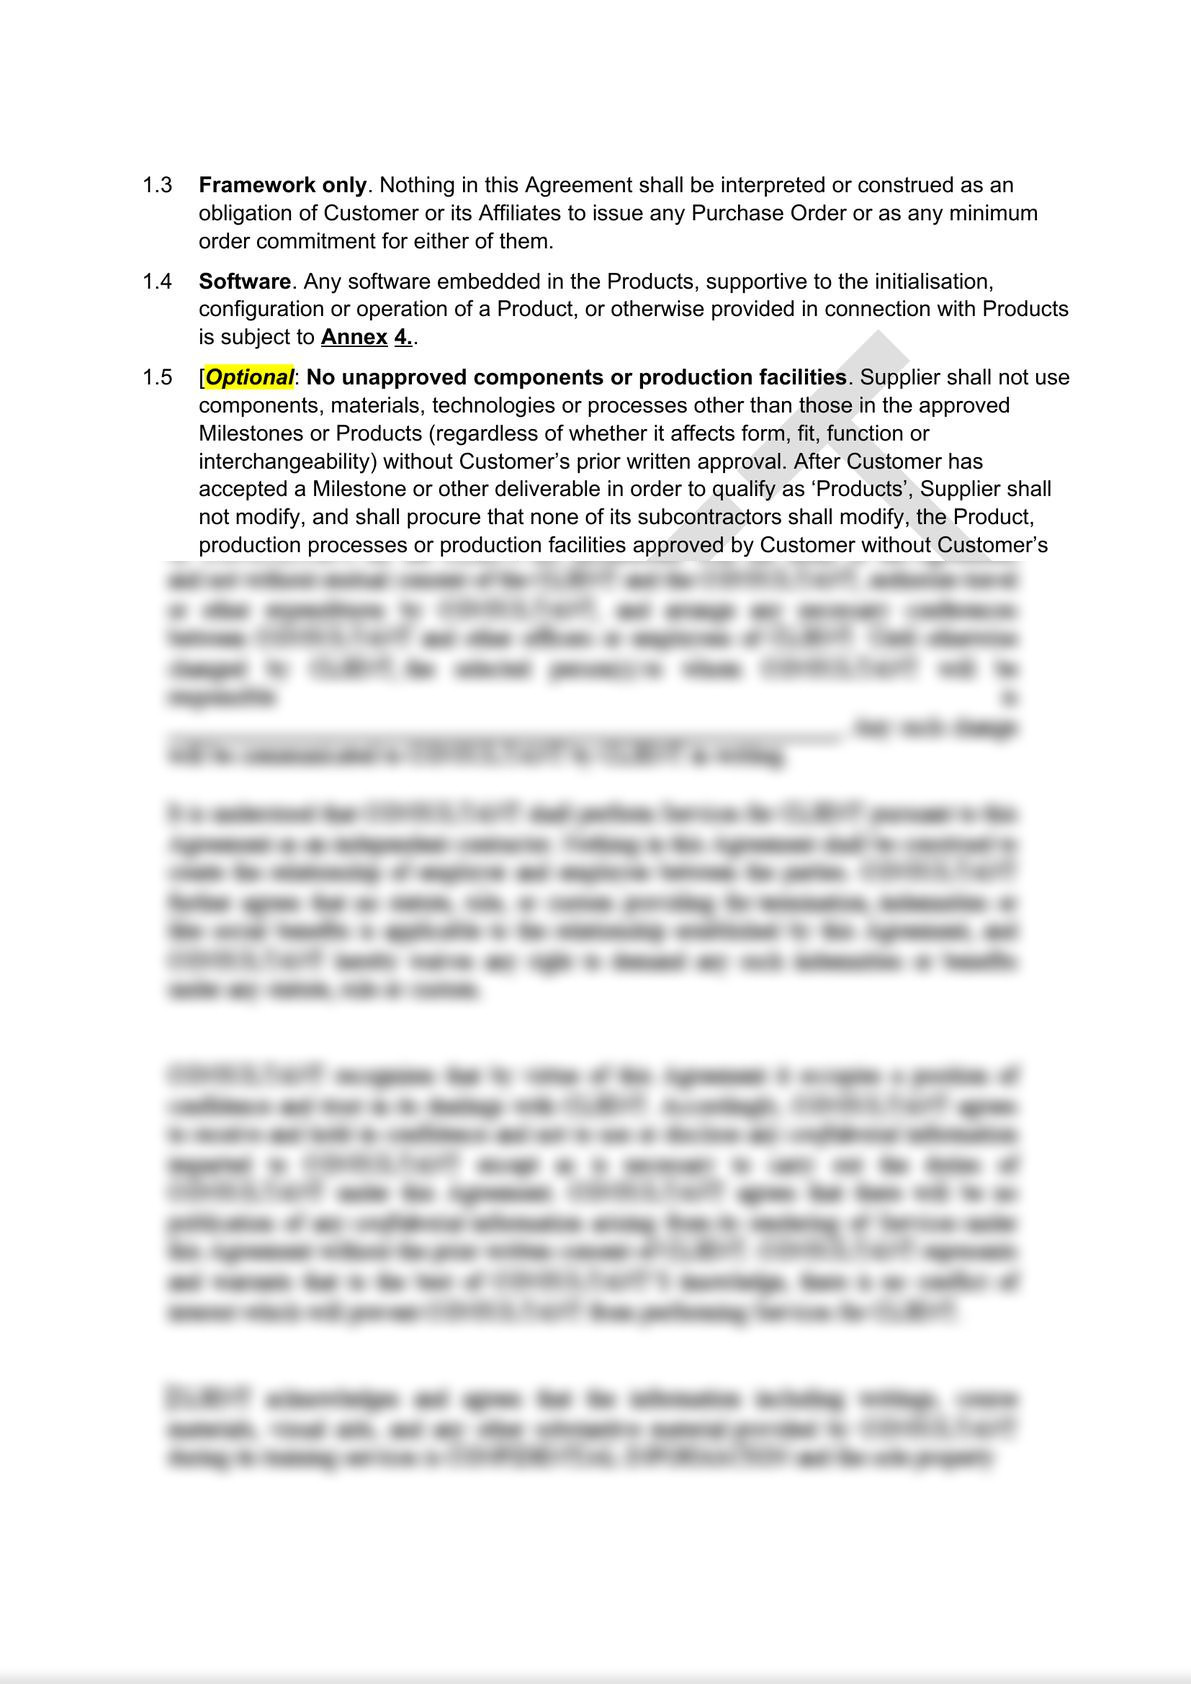 General Purchasing Agreement-6